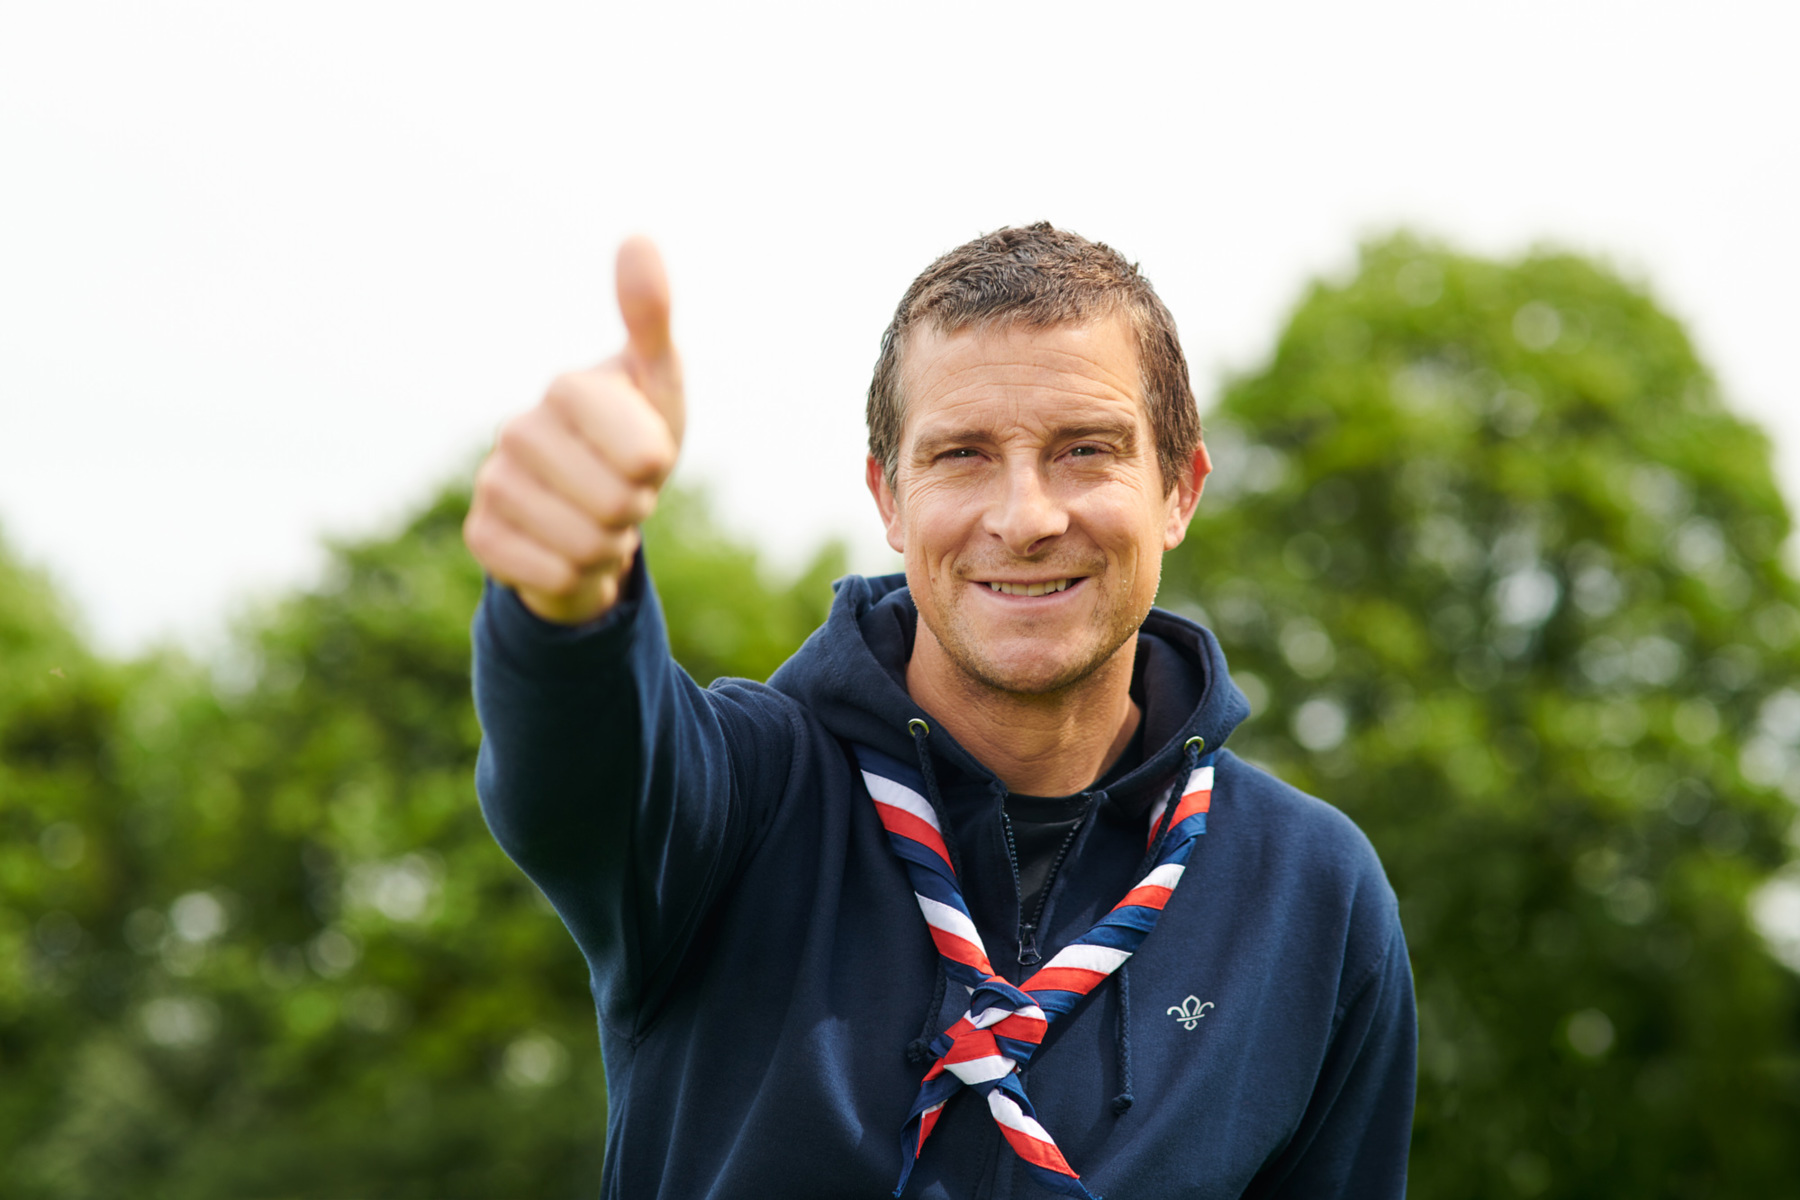 Bear Grylls gives a thumbs up to camera wearing Scouts hoodie and stripy necker scarf with trees in background